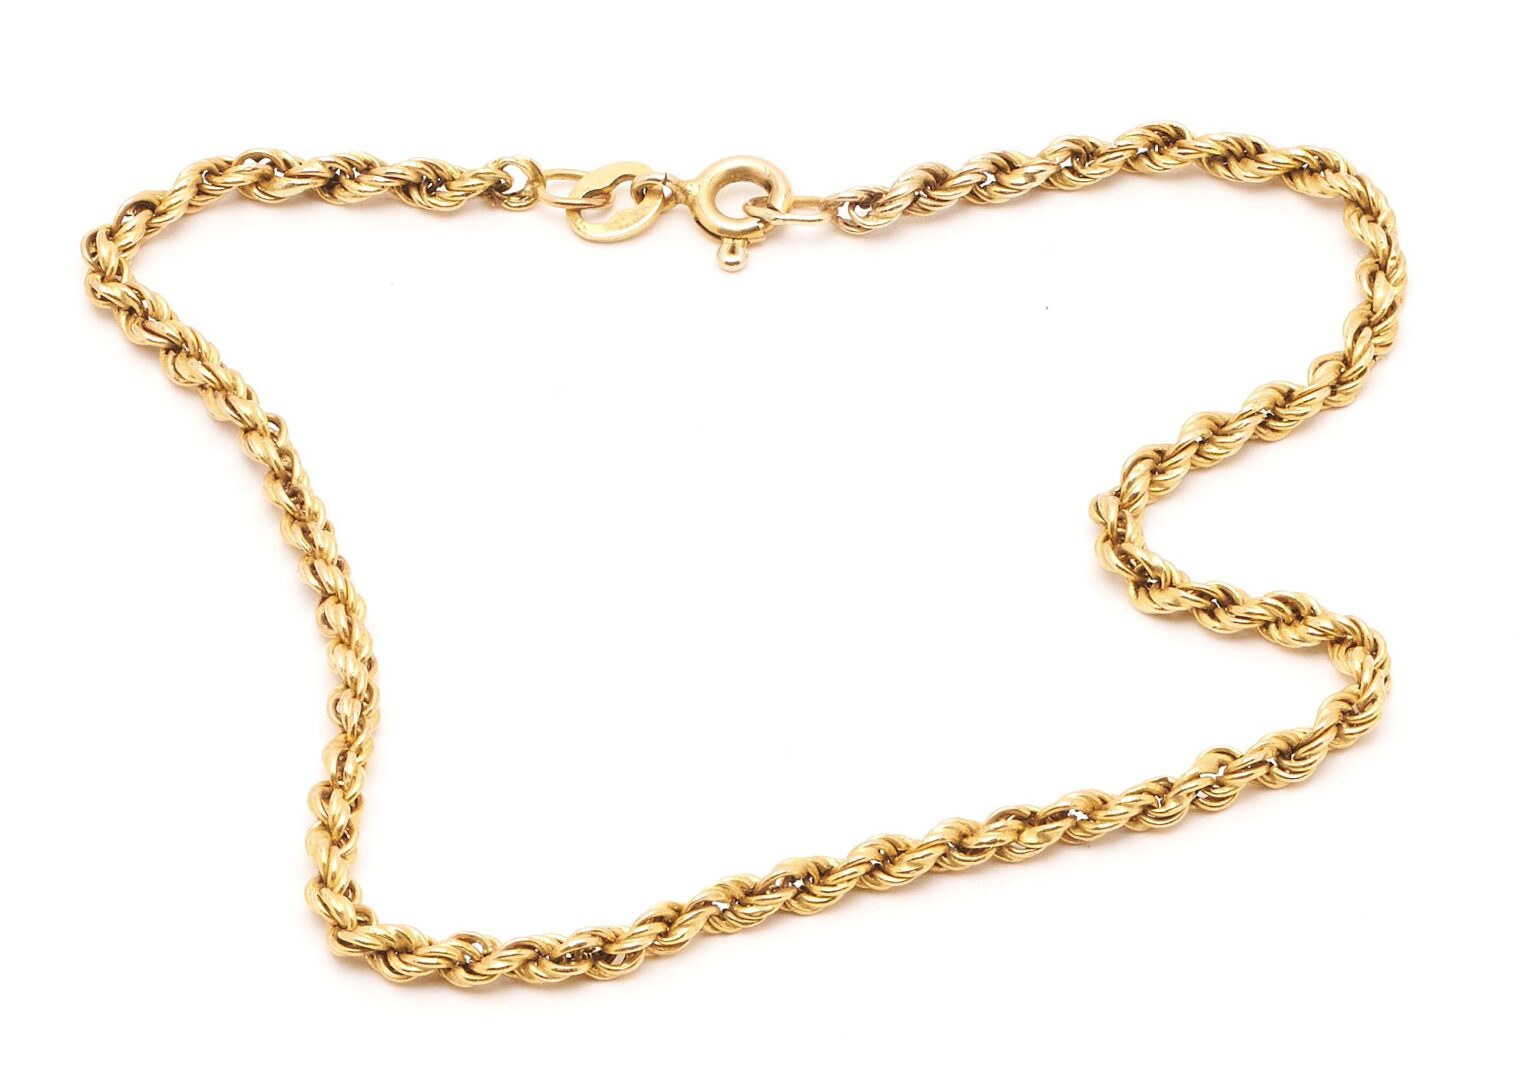 Lot 861: Four (4) Gold Rope Chain Bracelets